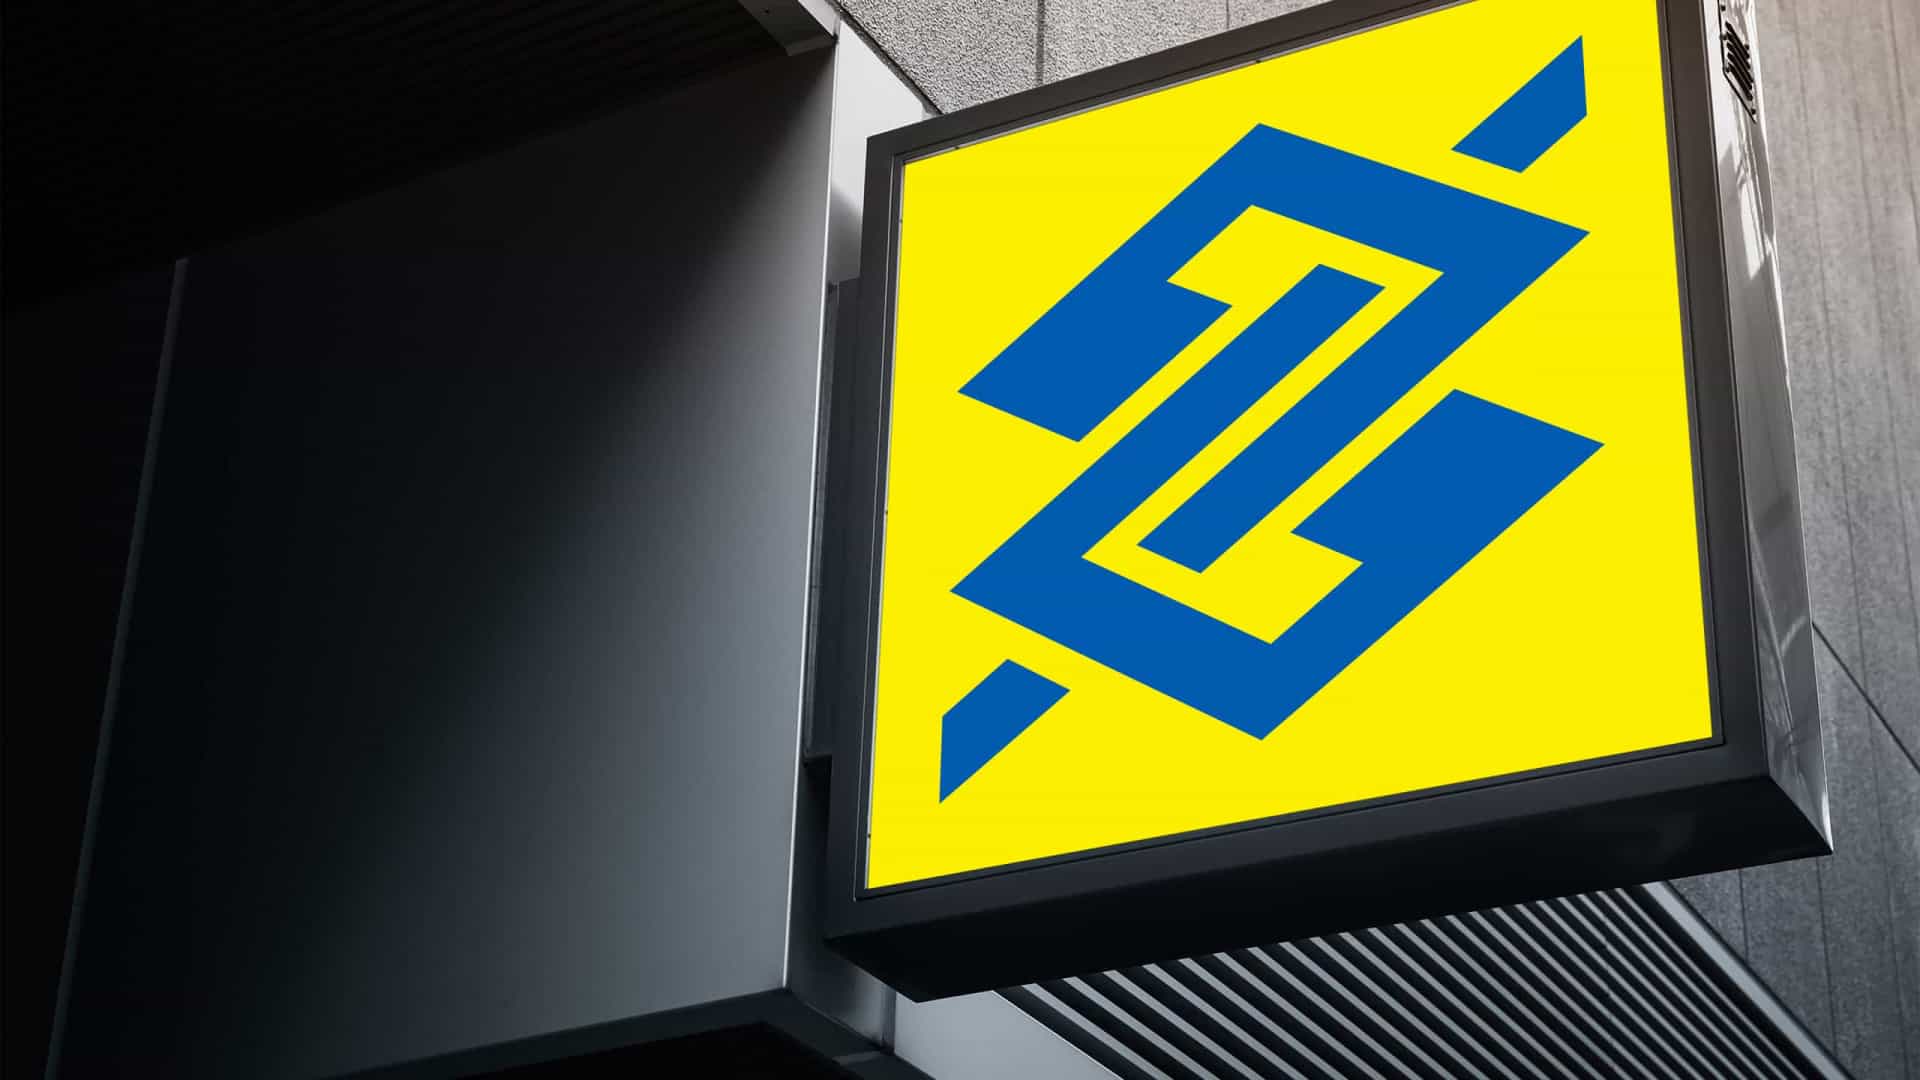 Banco do Brasil announces that ATMs are no longer operational